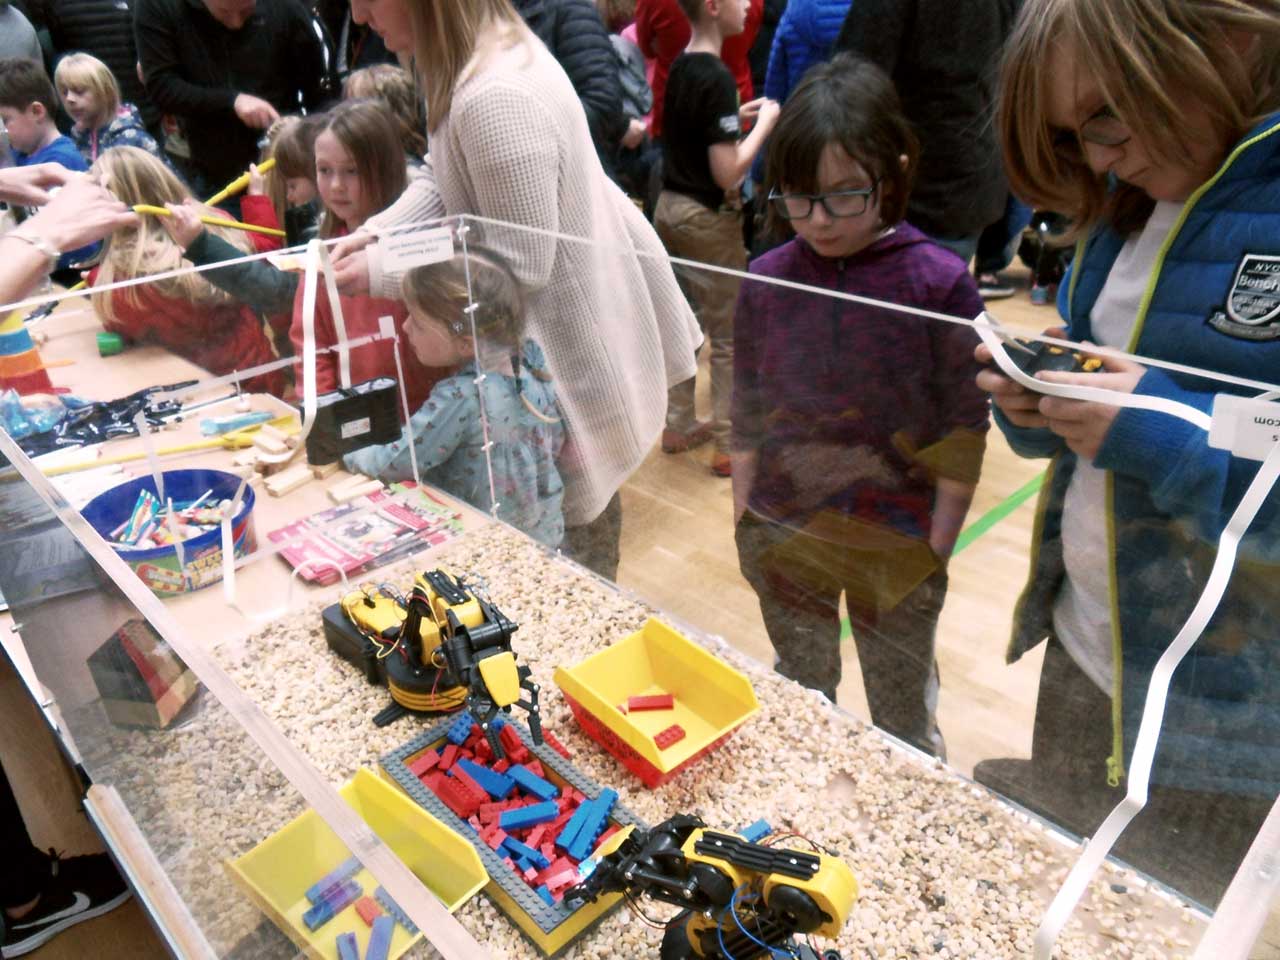 Photo: Caithness Science Festival 2019 Fun Day